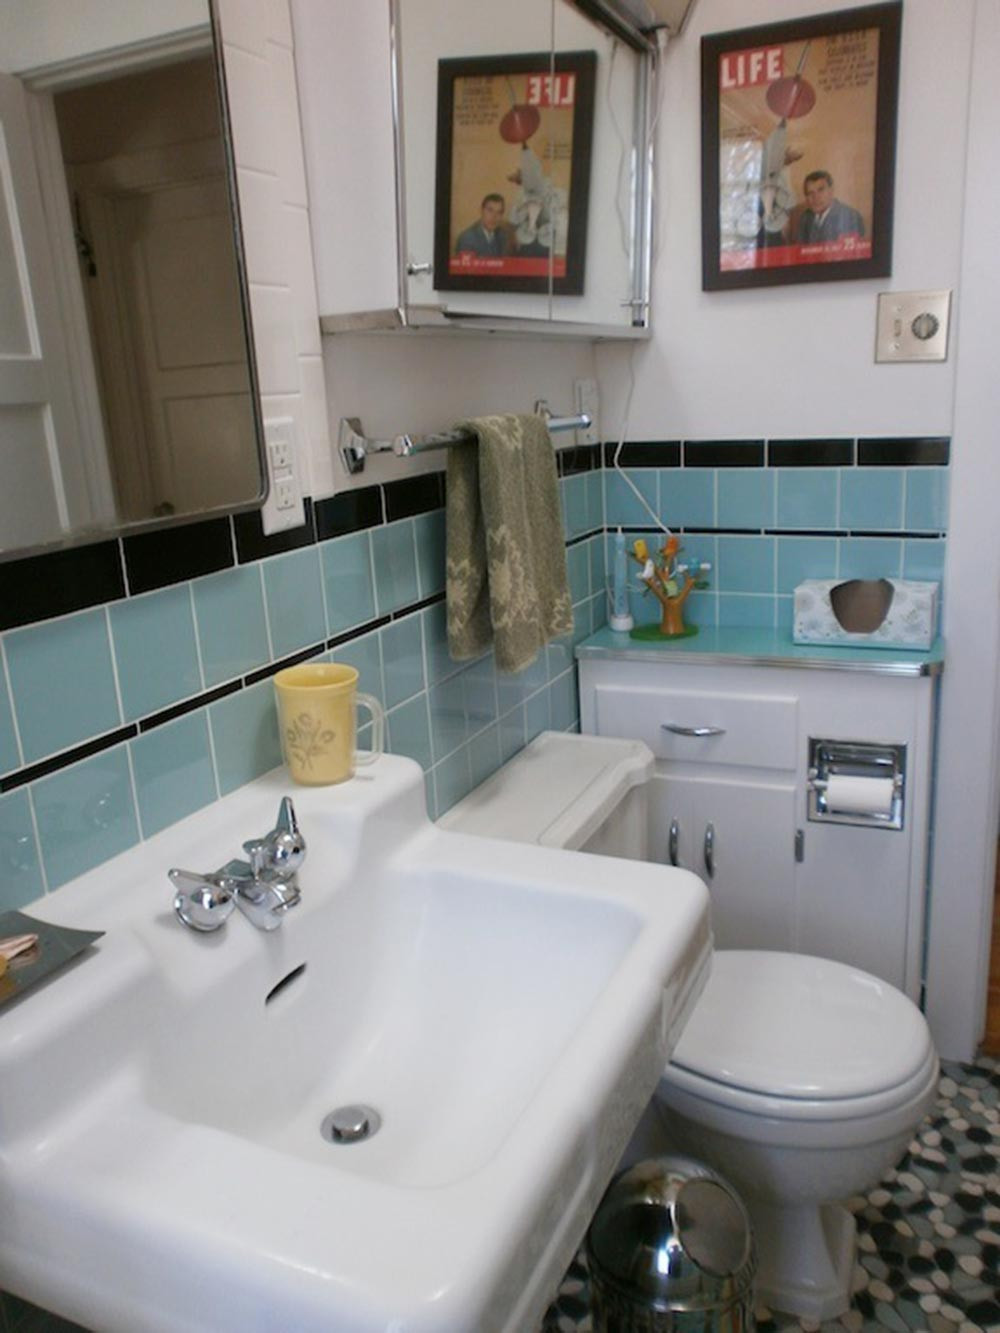 Remodeling Old Bathroom
 Cindy waits 28 years for her sunny retro bathroom remodel